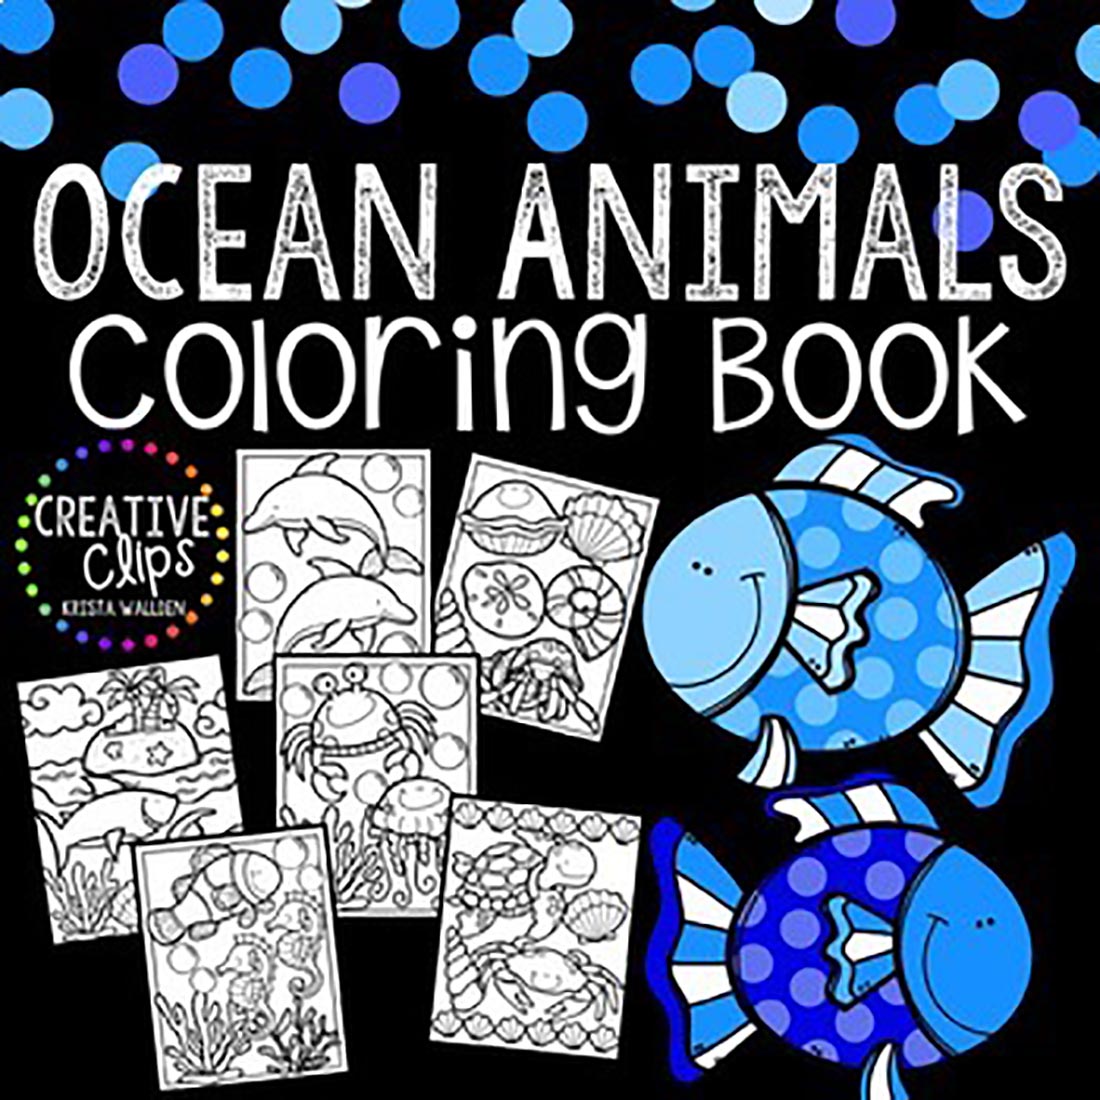 Ocean Animals Coloring Book preview image.